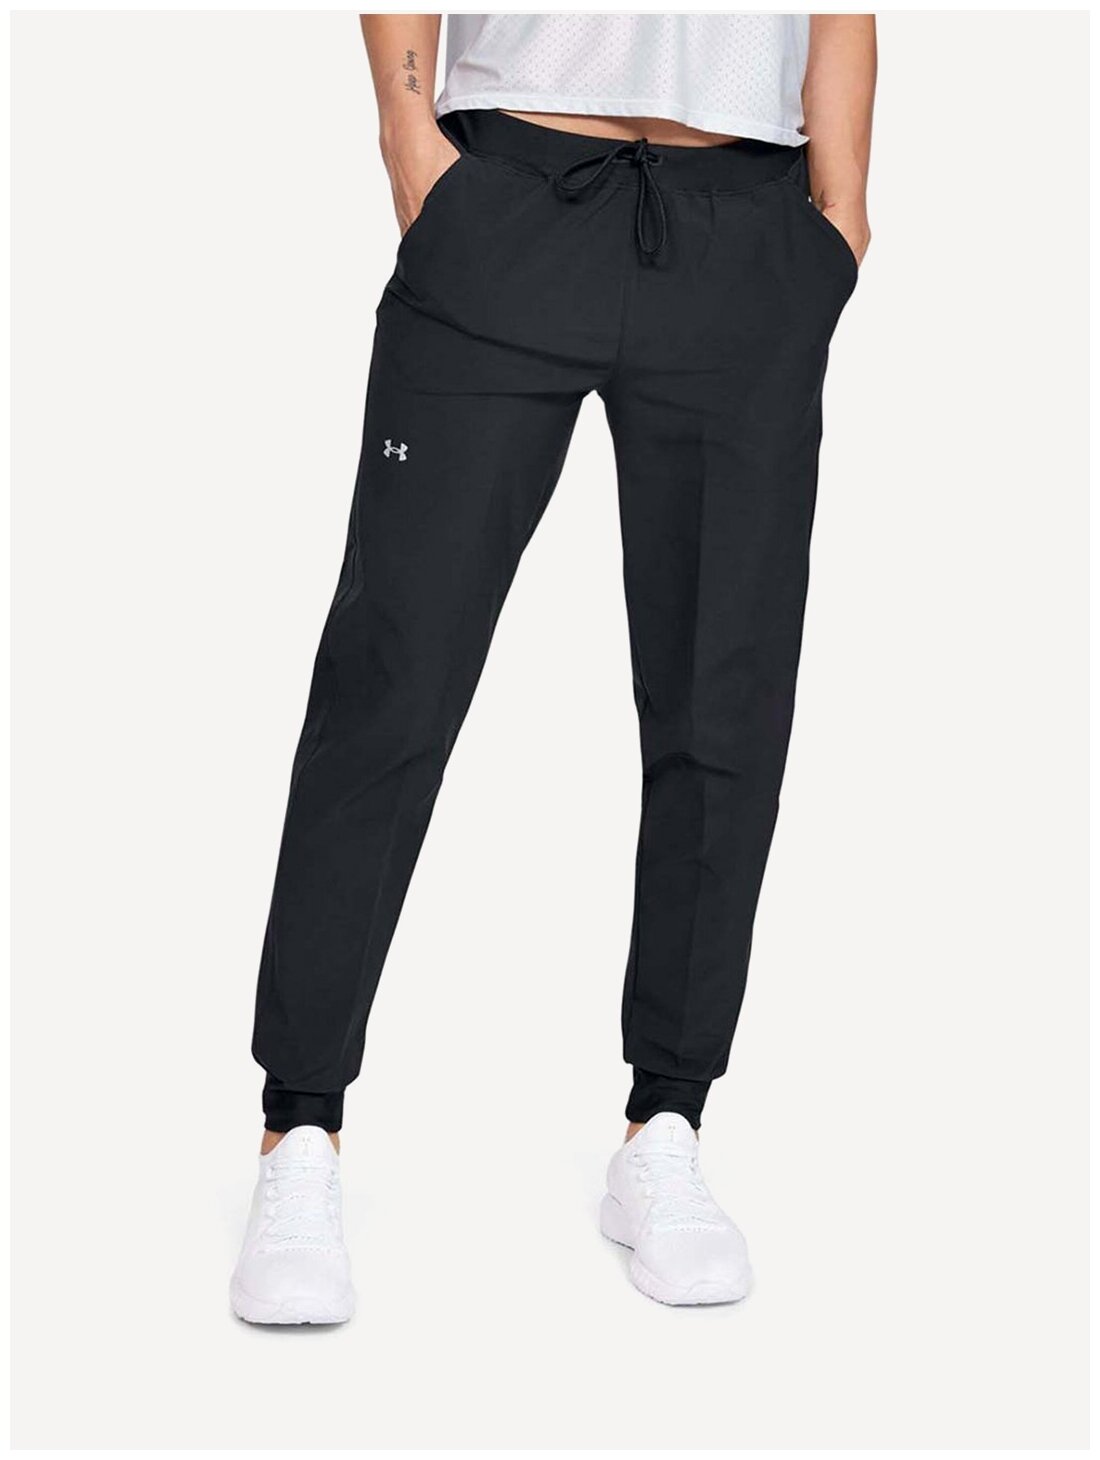 Брюки Under Armour UA Armour Sport Woven Pant 1348447-001 MD 